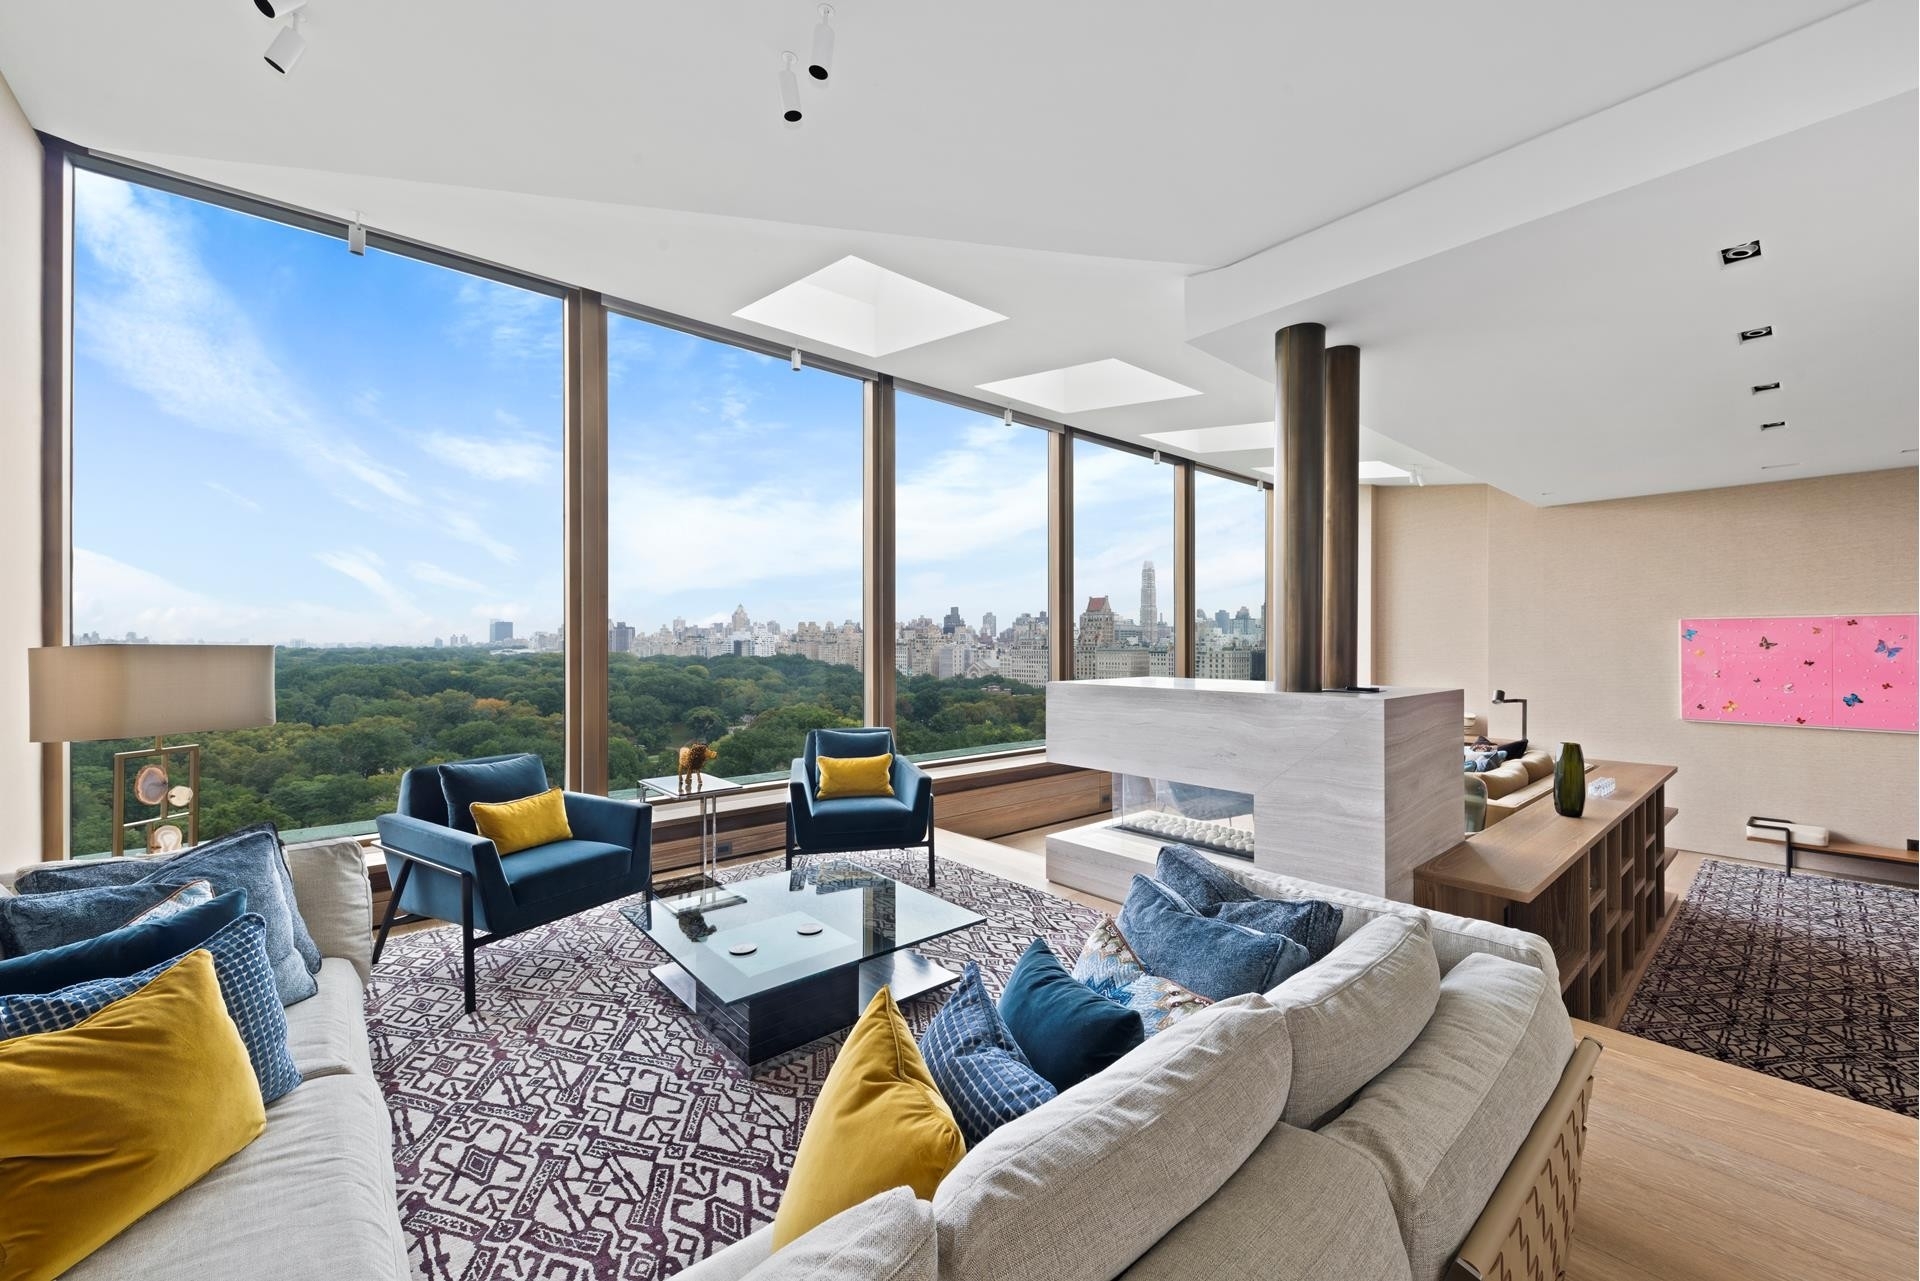 1. Co-op Properties for Sale at 128 CENTRAL PARK S, PH Central Park South, New York, New York 10019